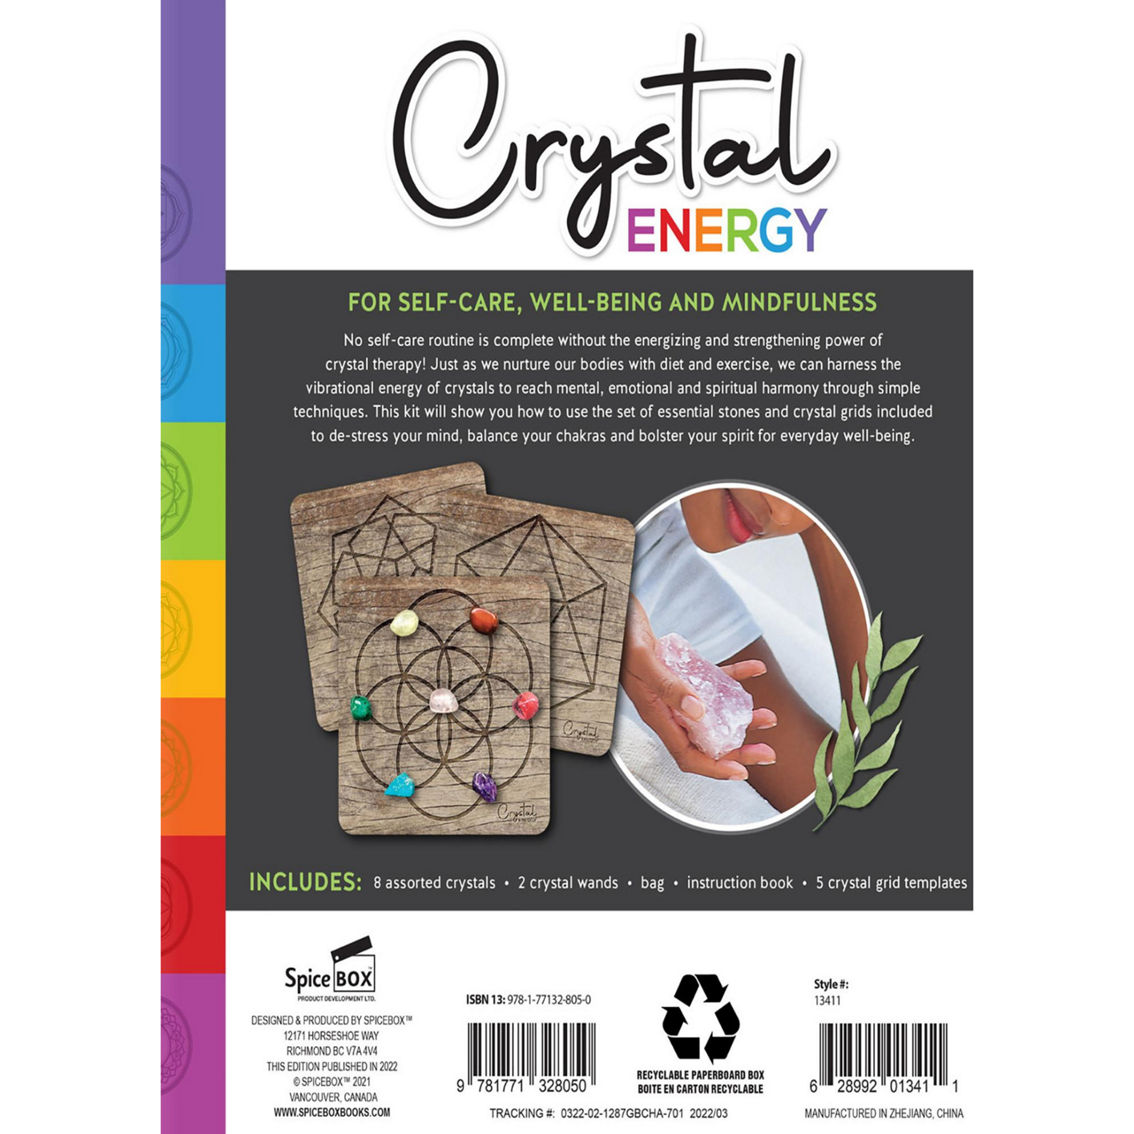 SpiceBox Gift Box: Crystal Energy - Image 2 of 5